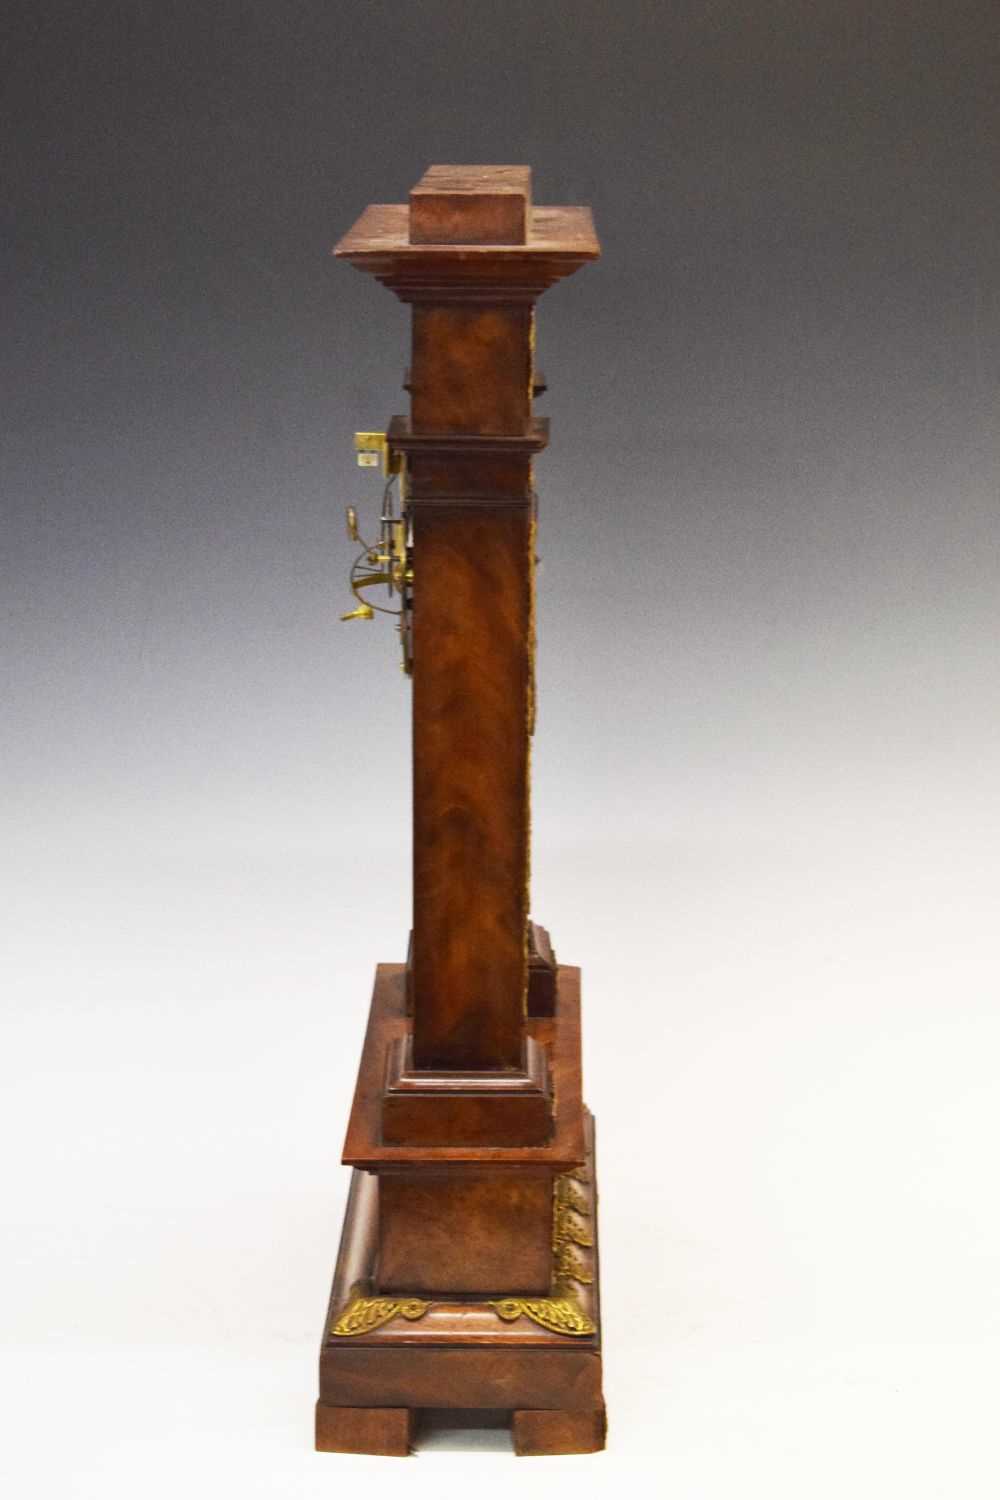 Early 19th Century French mahogany and ormolu-mounted mantel clock - Image 2 of 7